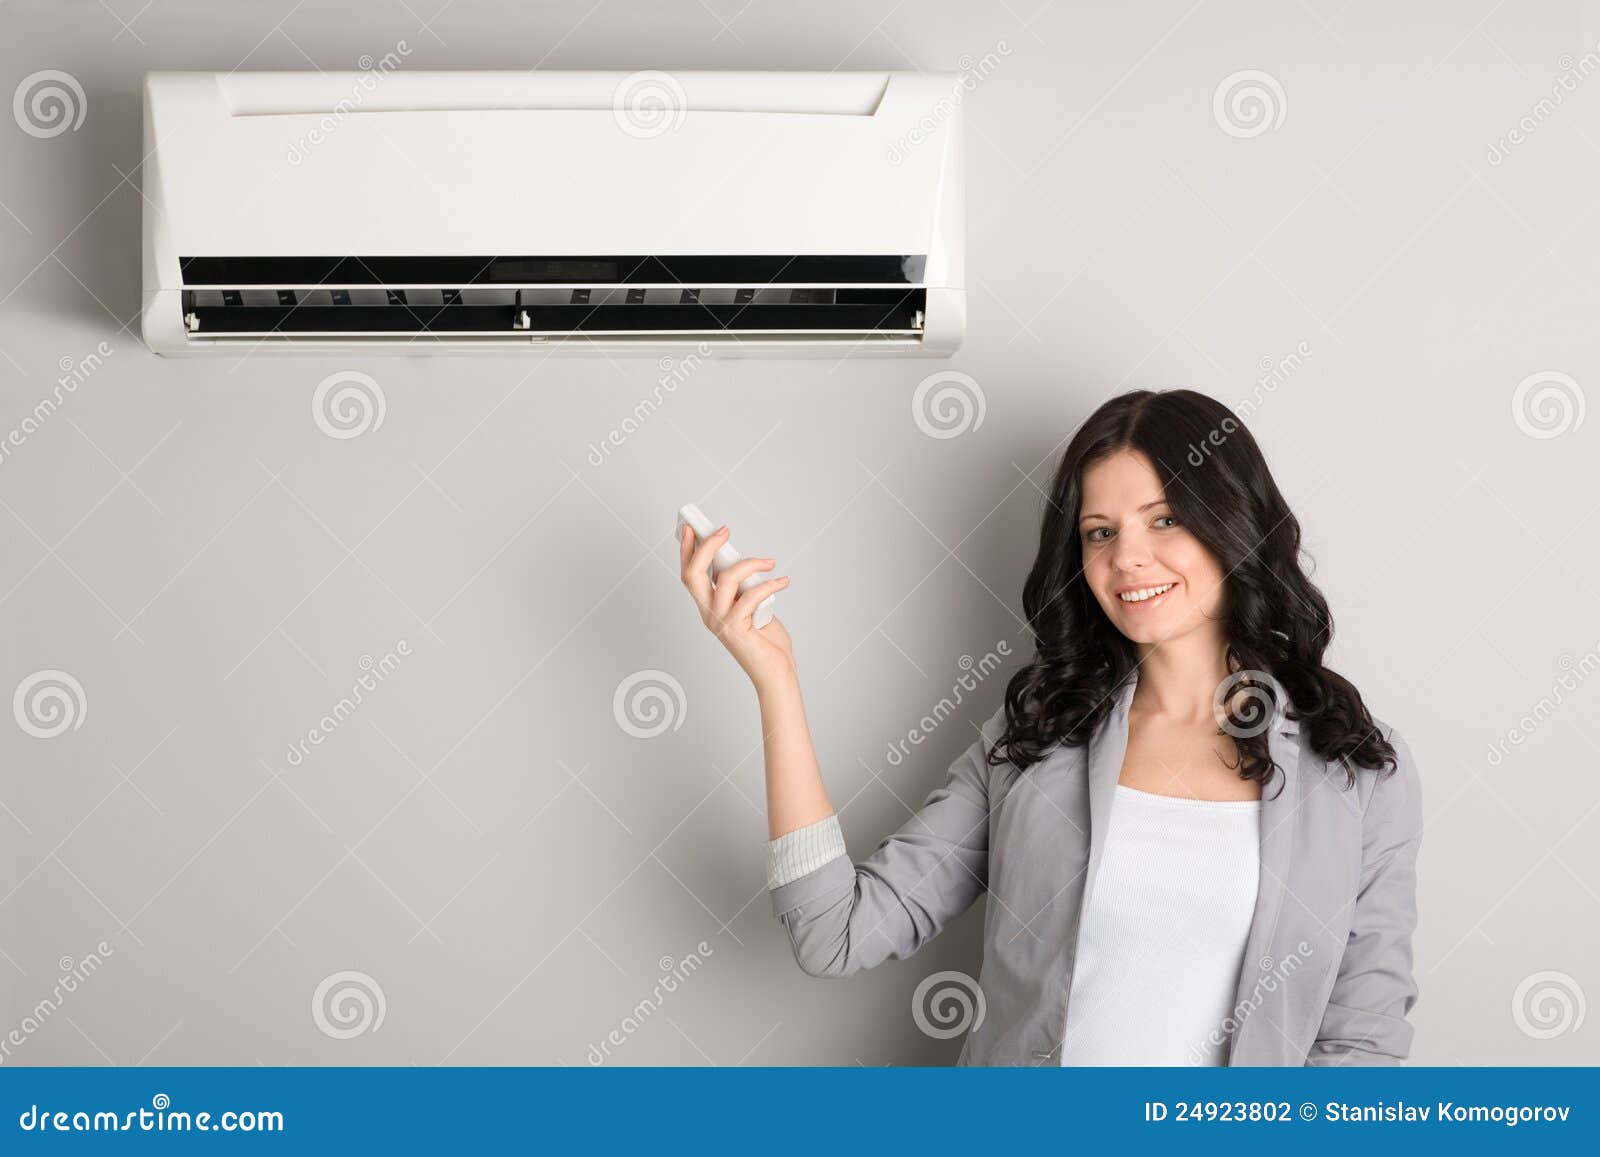 girl holding a remote control air conditioner